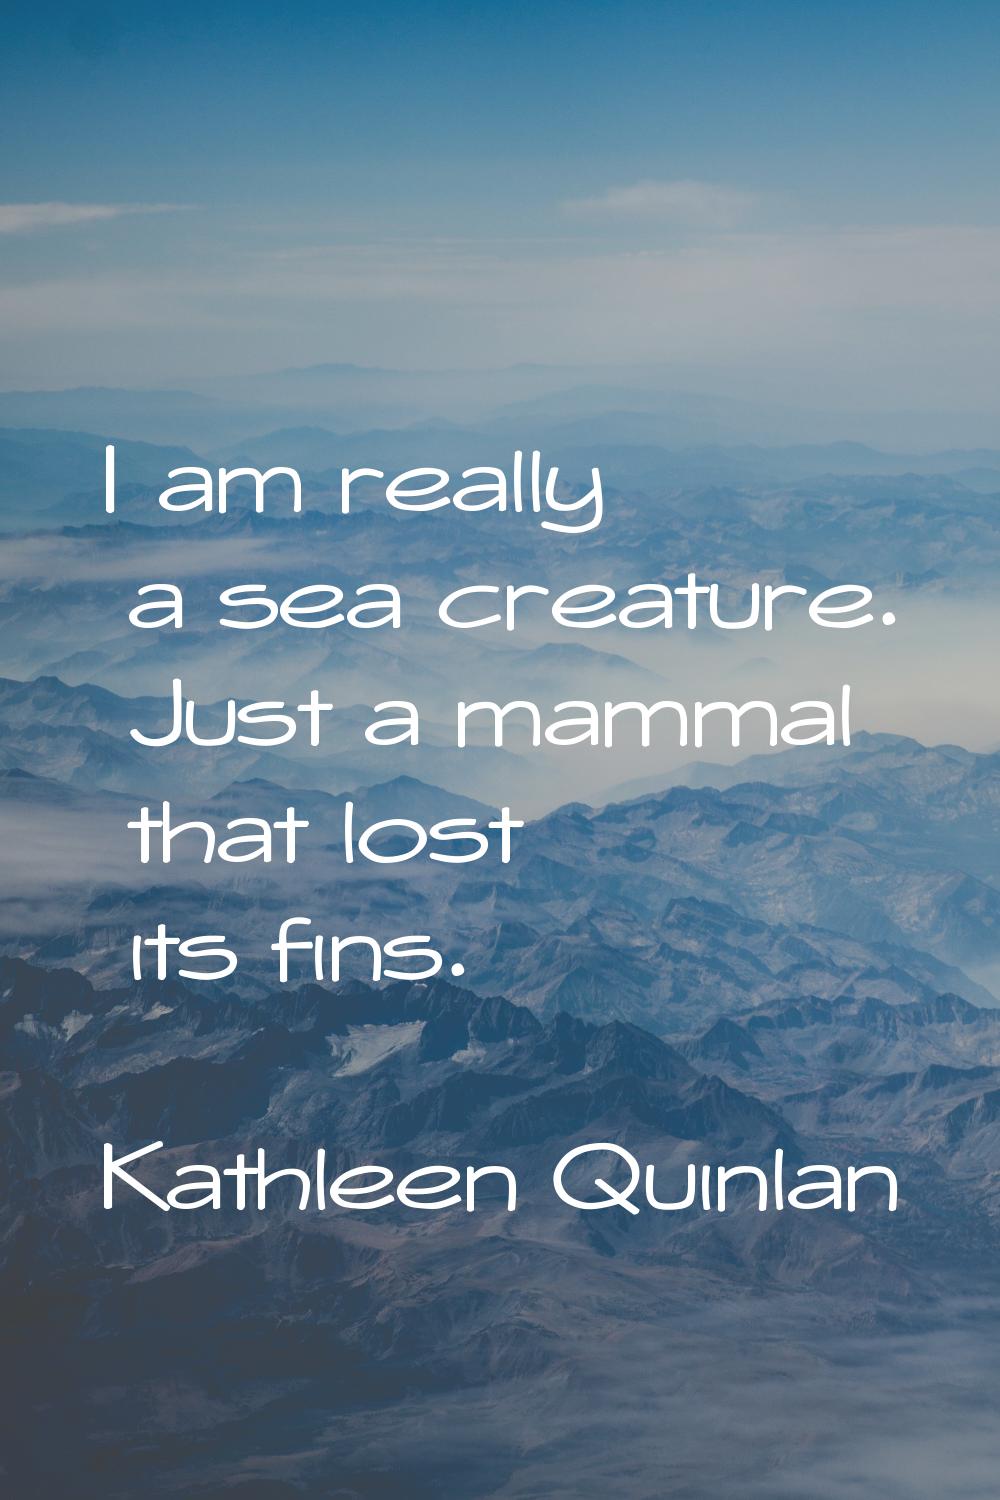 I am really a sea creature. Just a mammal that lost its fins.